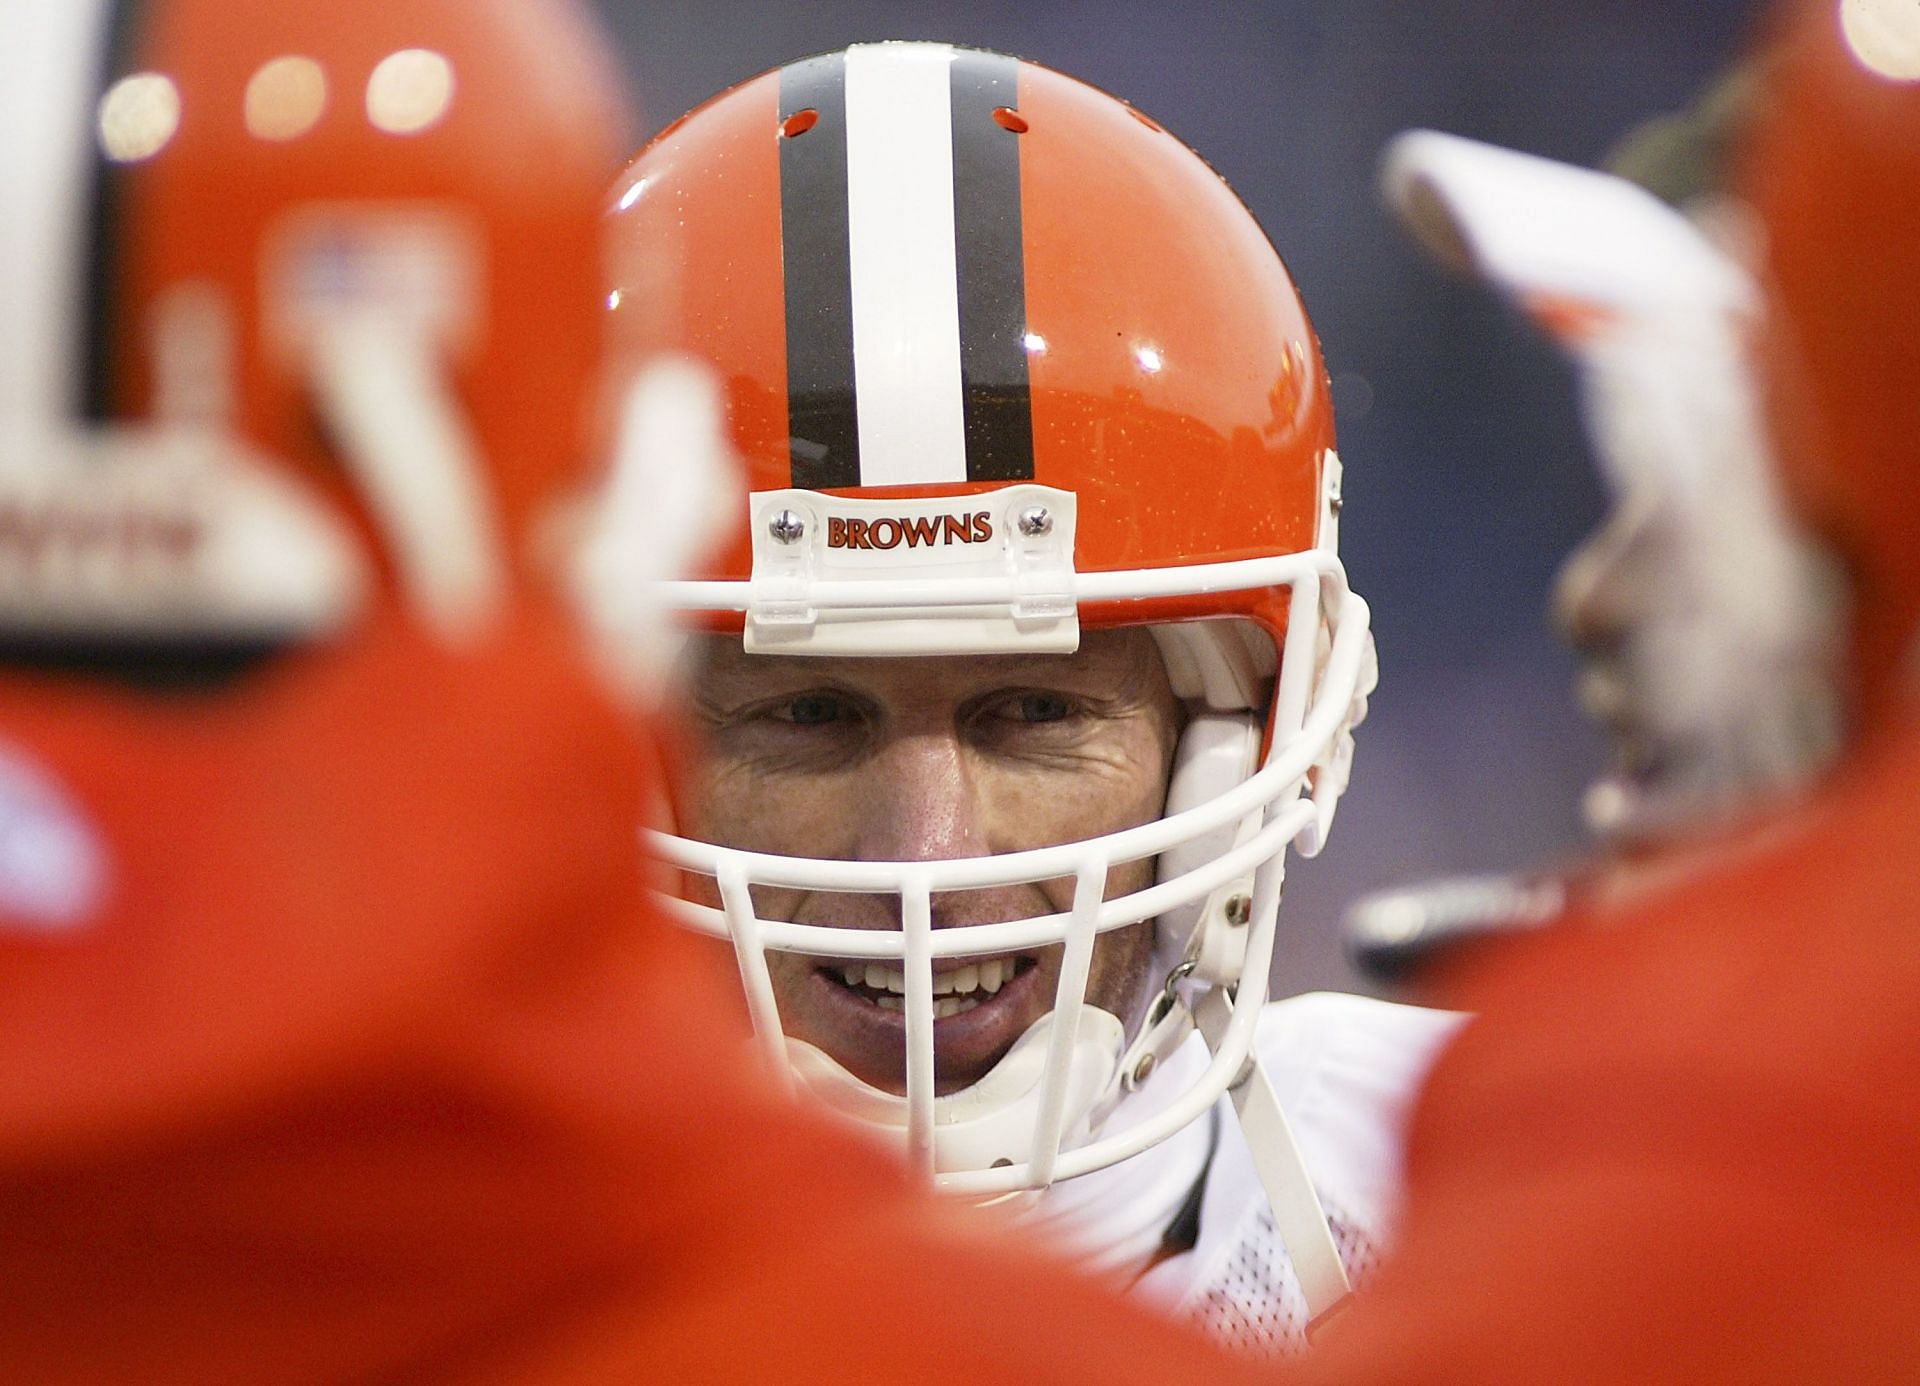 Jeff Garcia spent one year playing for Cleveland Browns in NFL